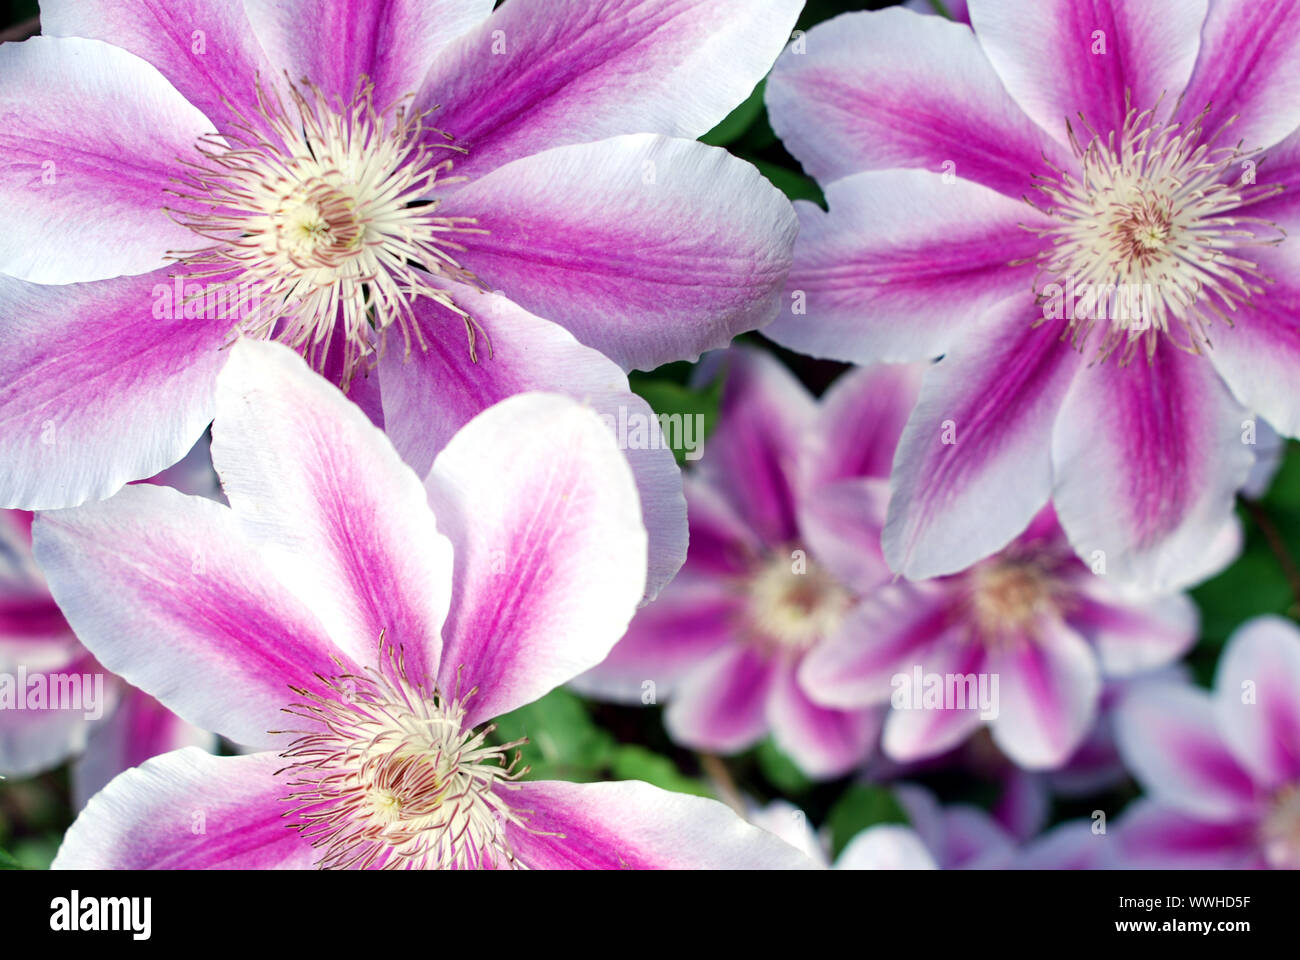 Clematis pink white Stock Photo